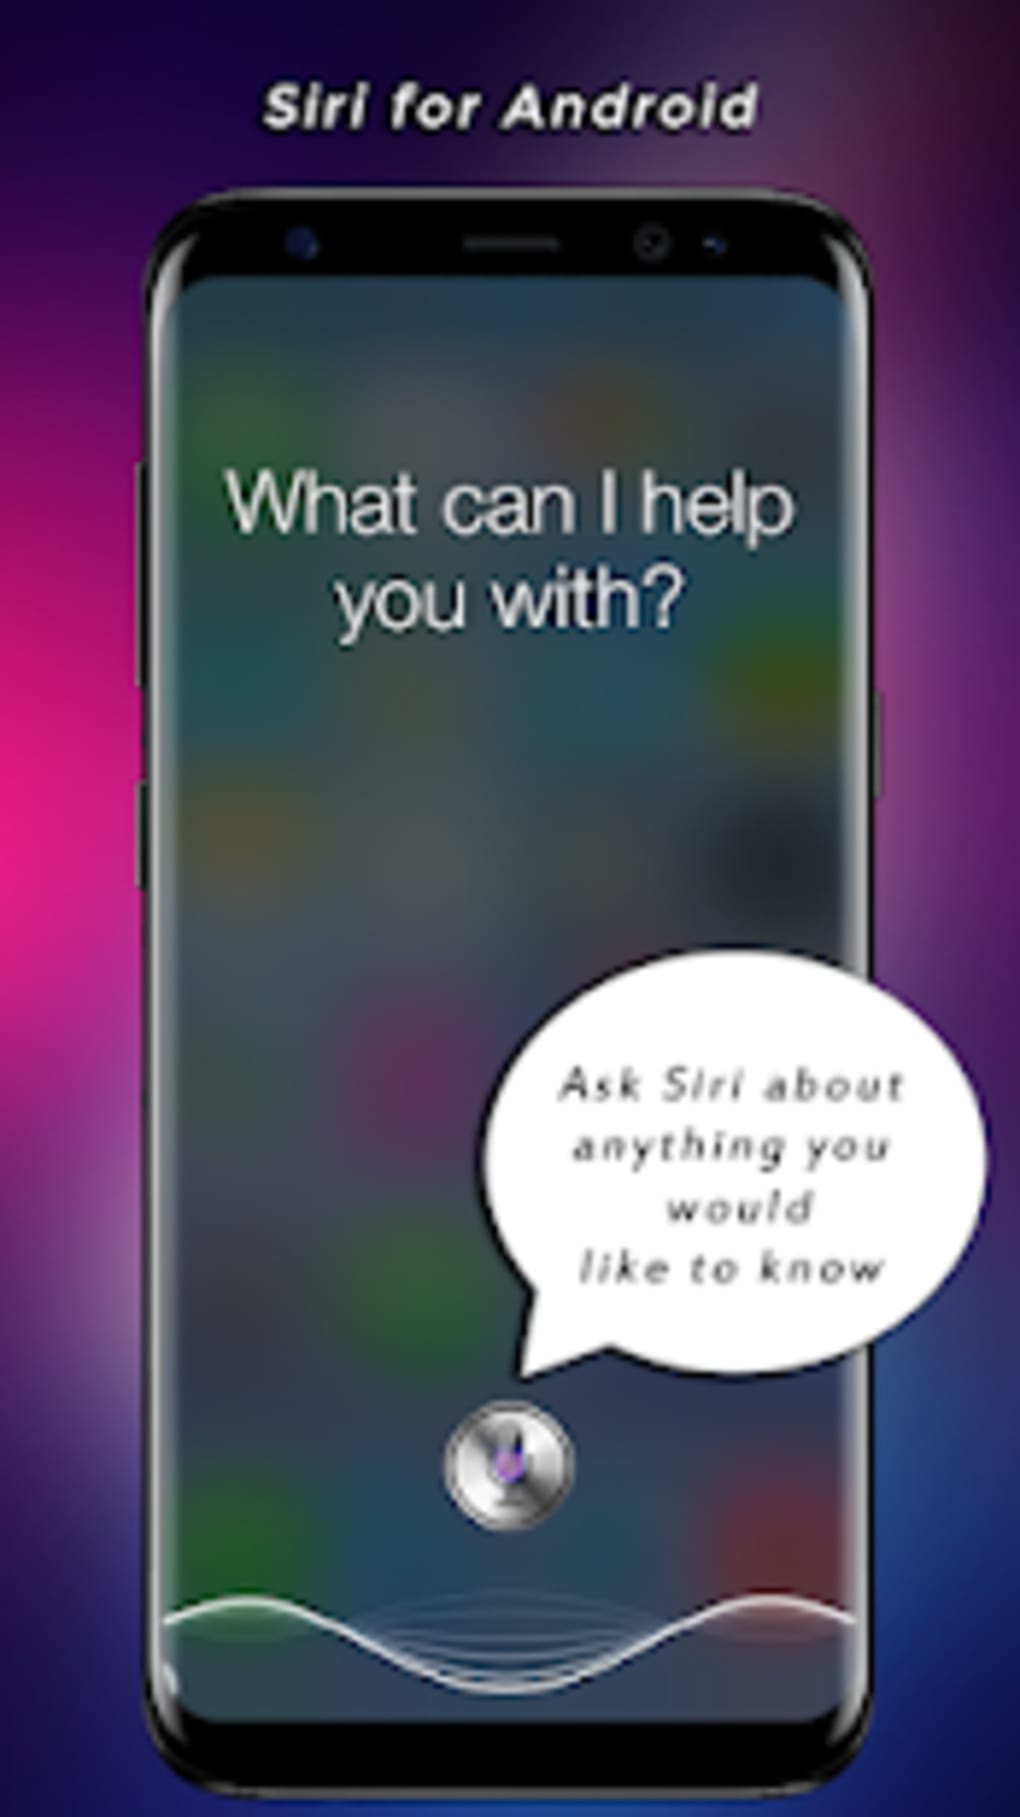 Download Siri For Android Voice Assistant